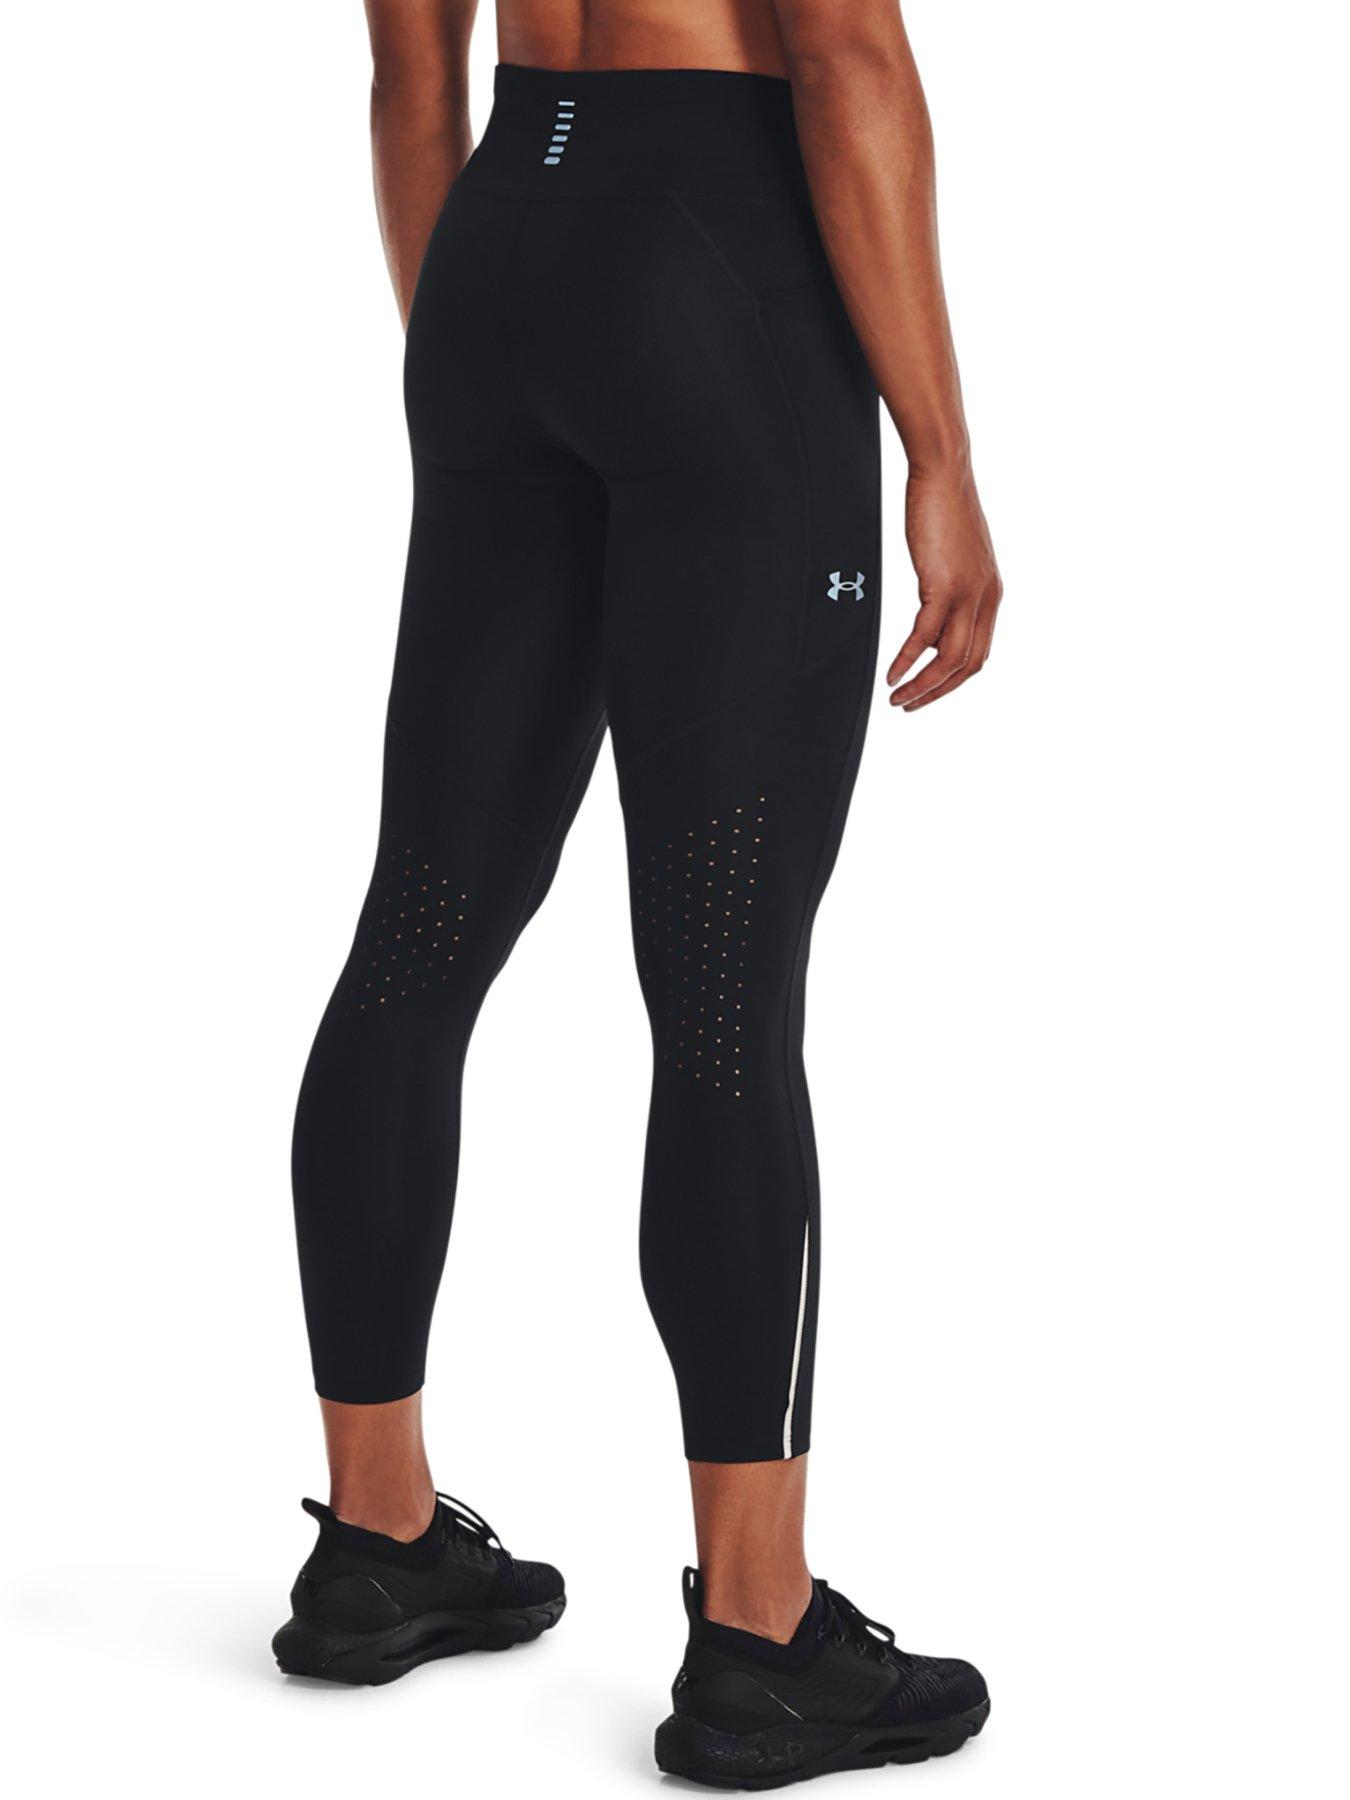 Under Armour Women's UA Fly Fast Performance 7/8 Tights Black